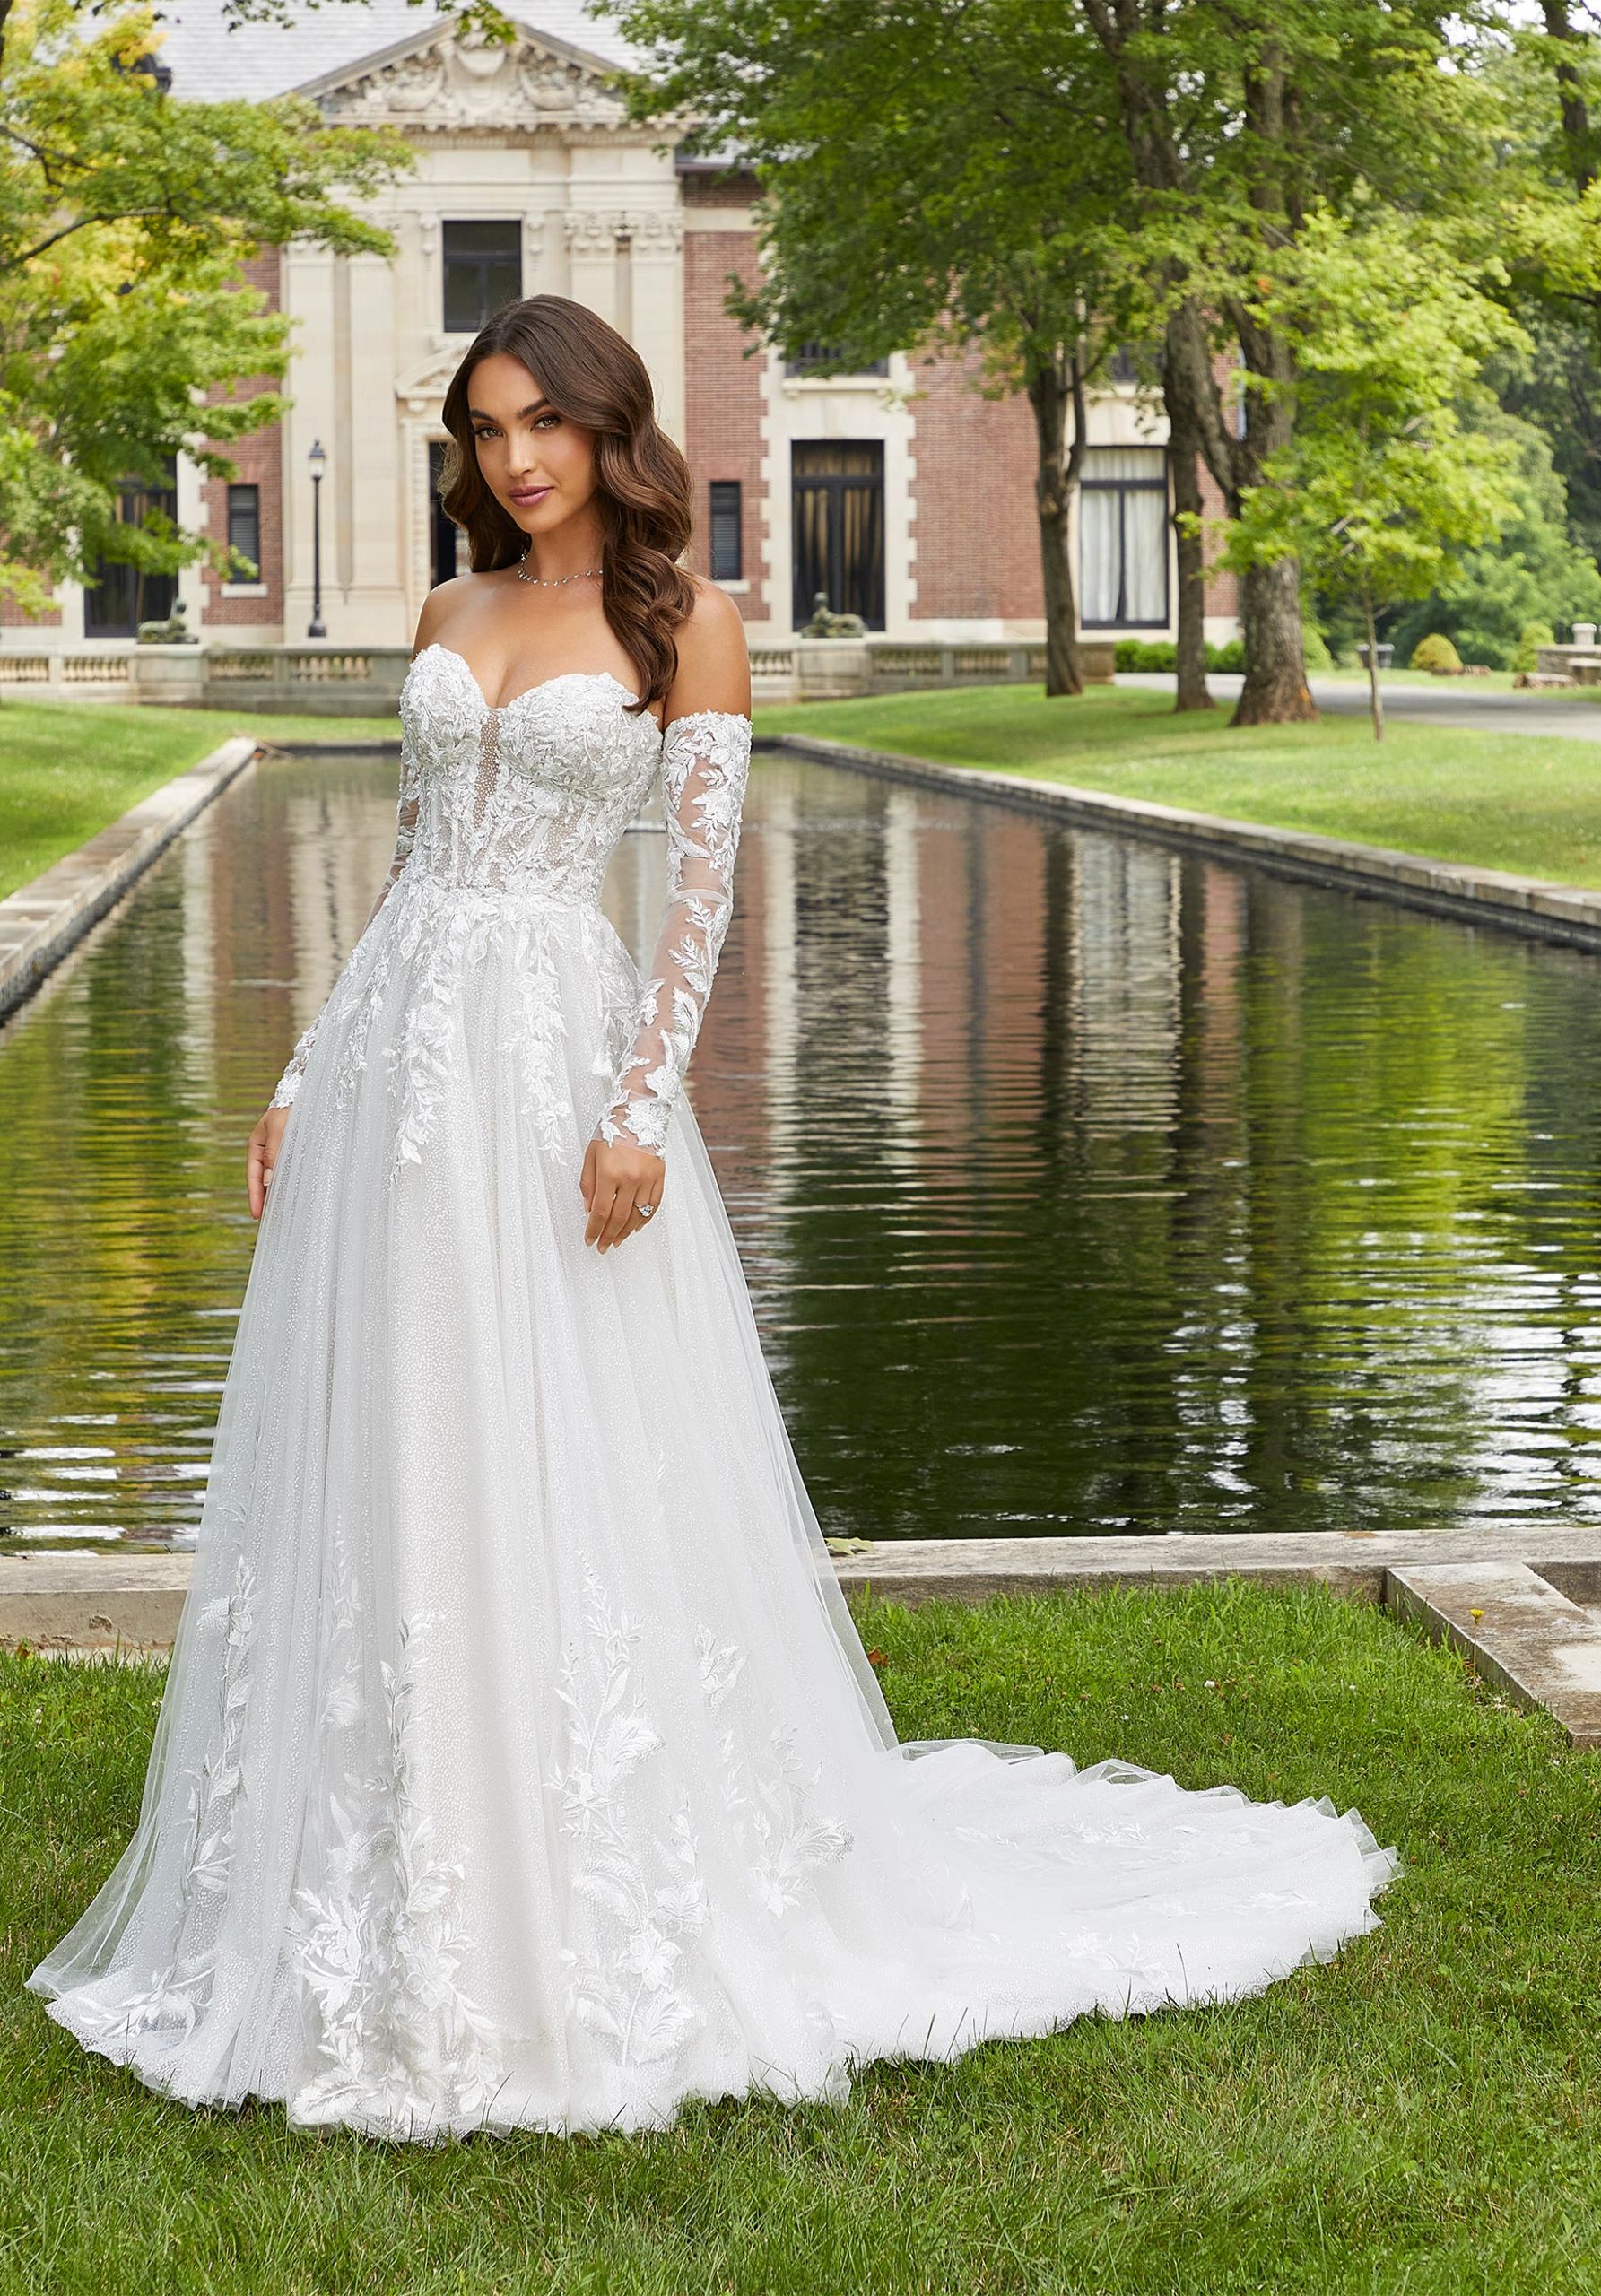 Wedding Dresses in Montreal  Reviews for Bridal Shops